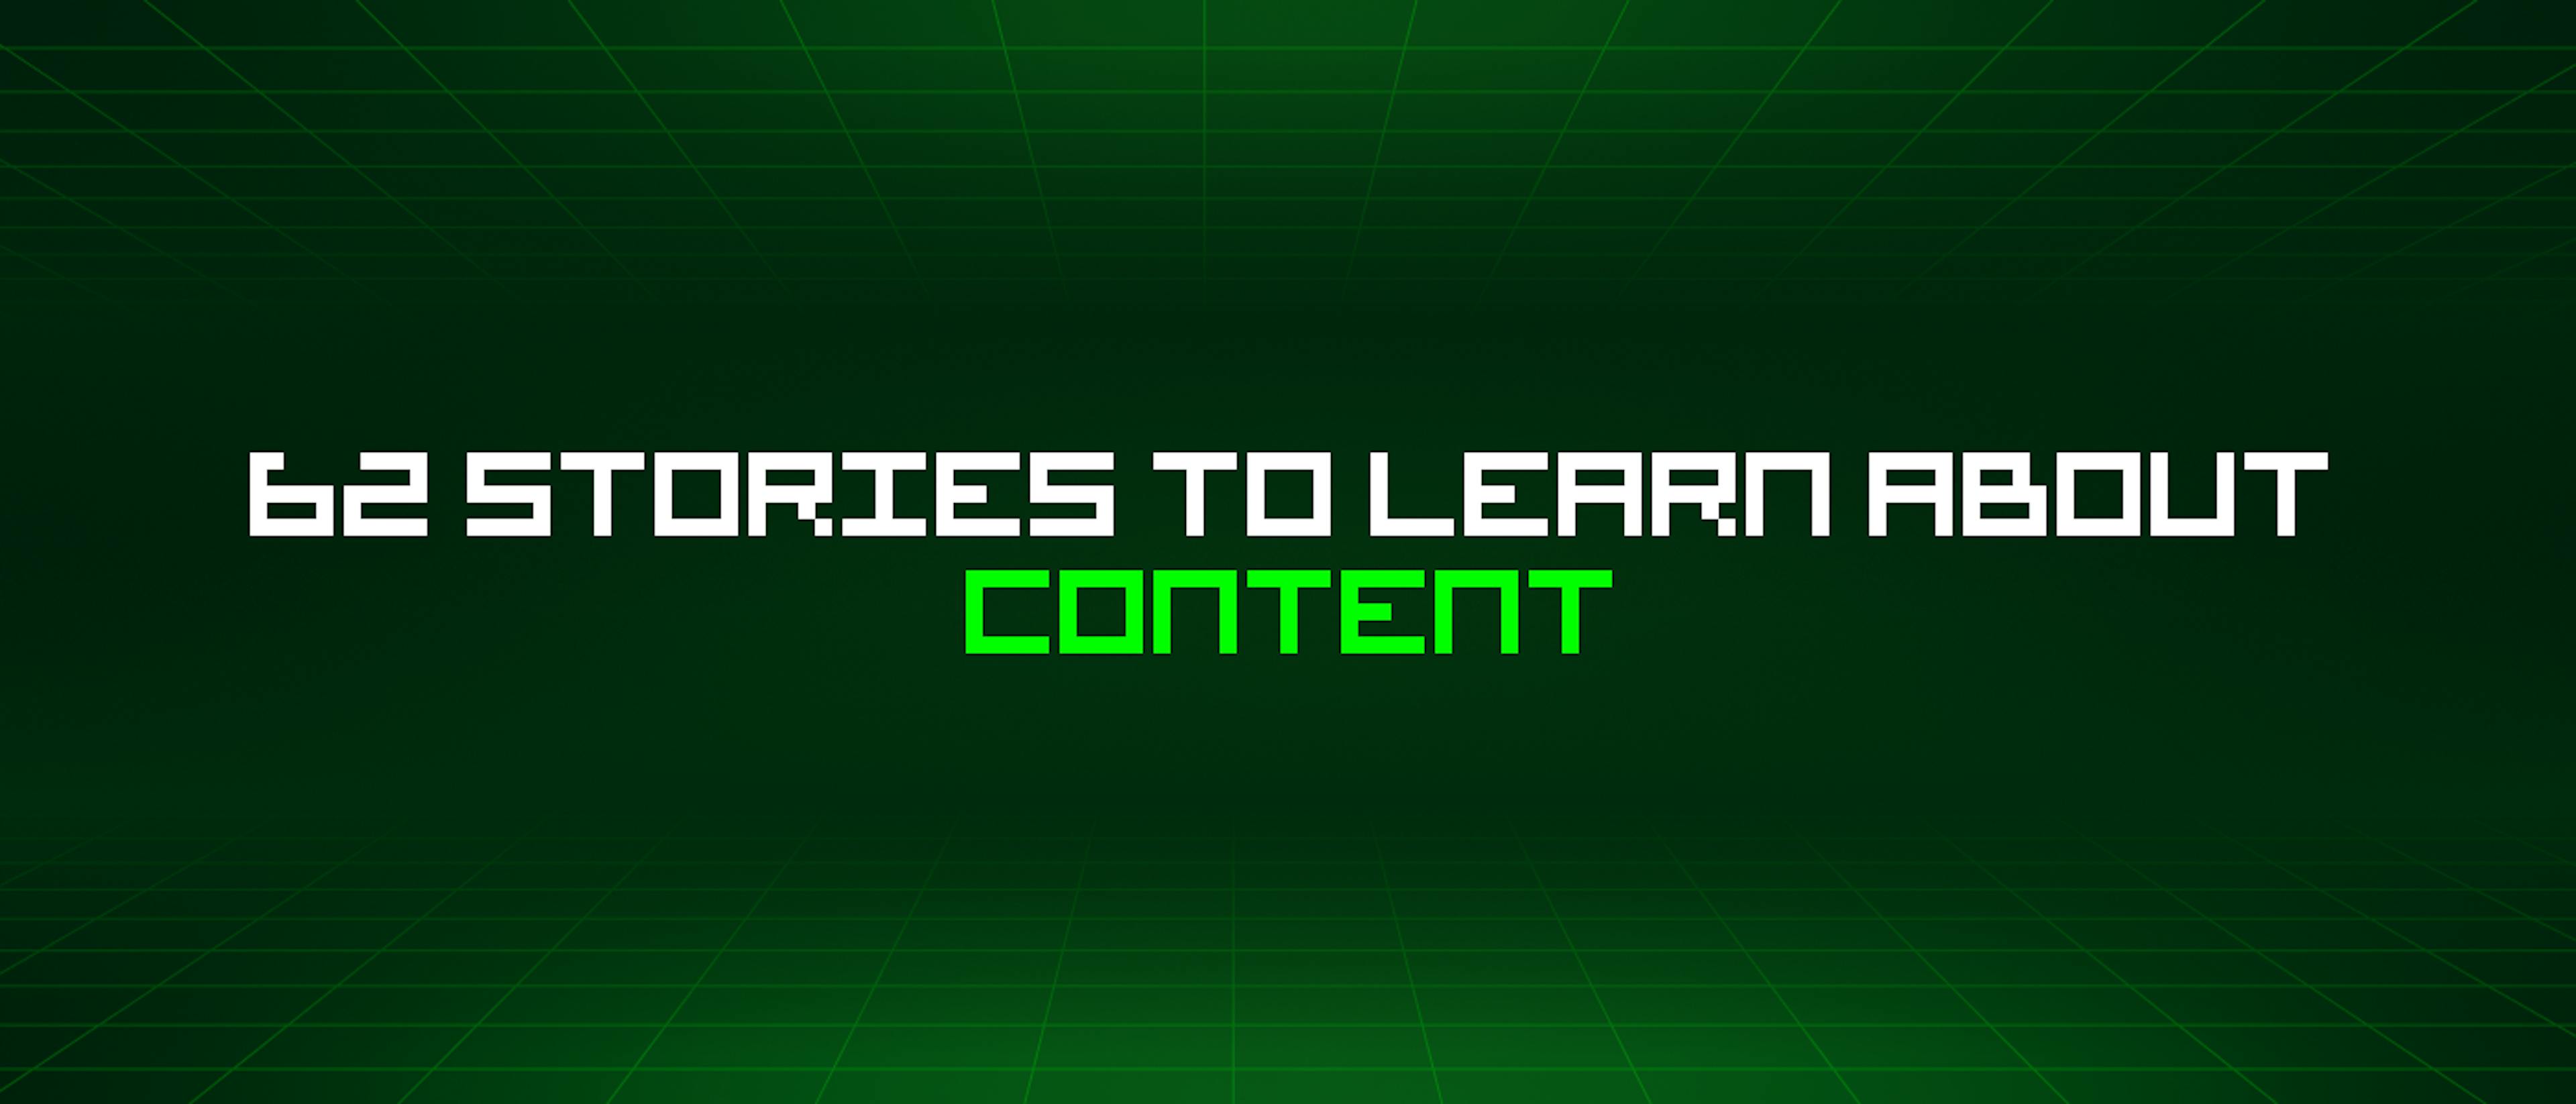 /62-stories-to-learn-about-content feature image